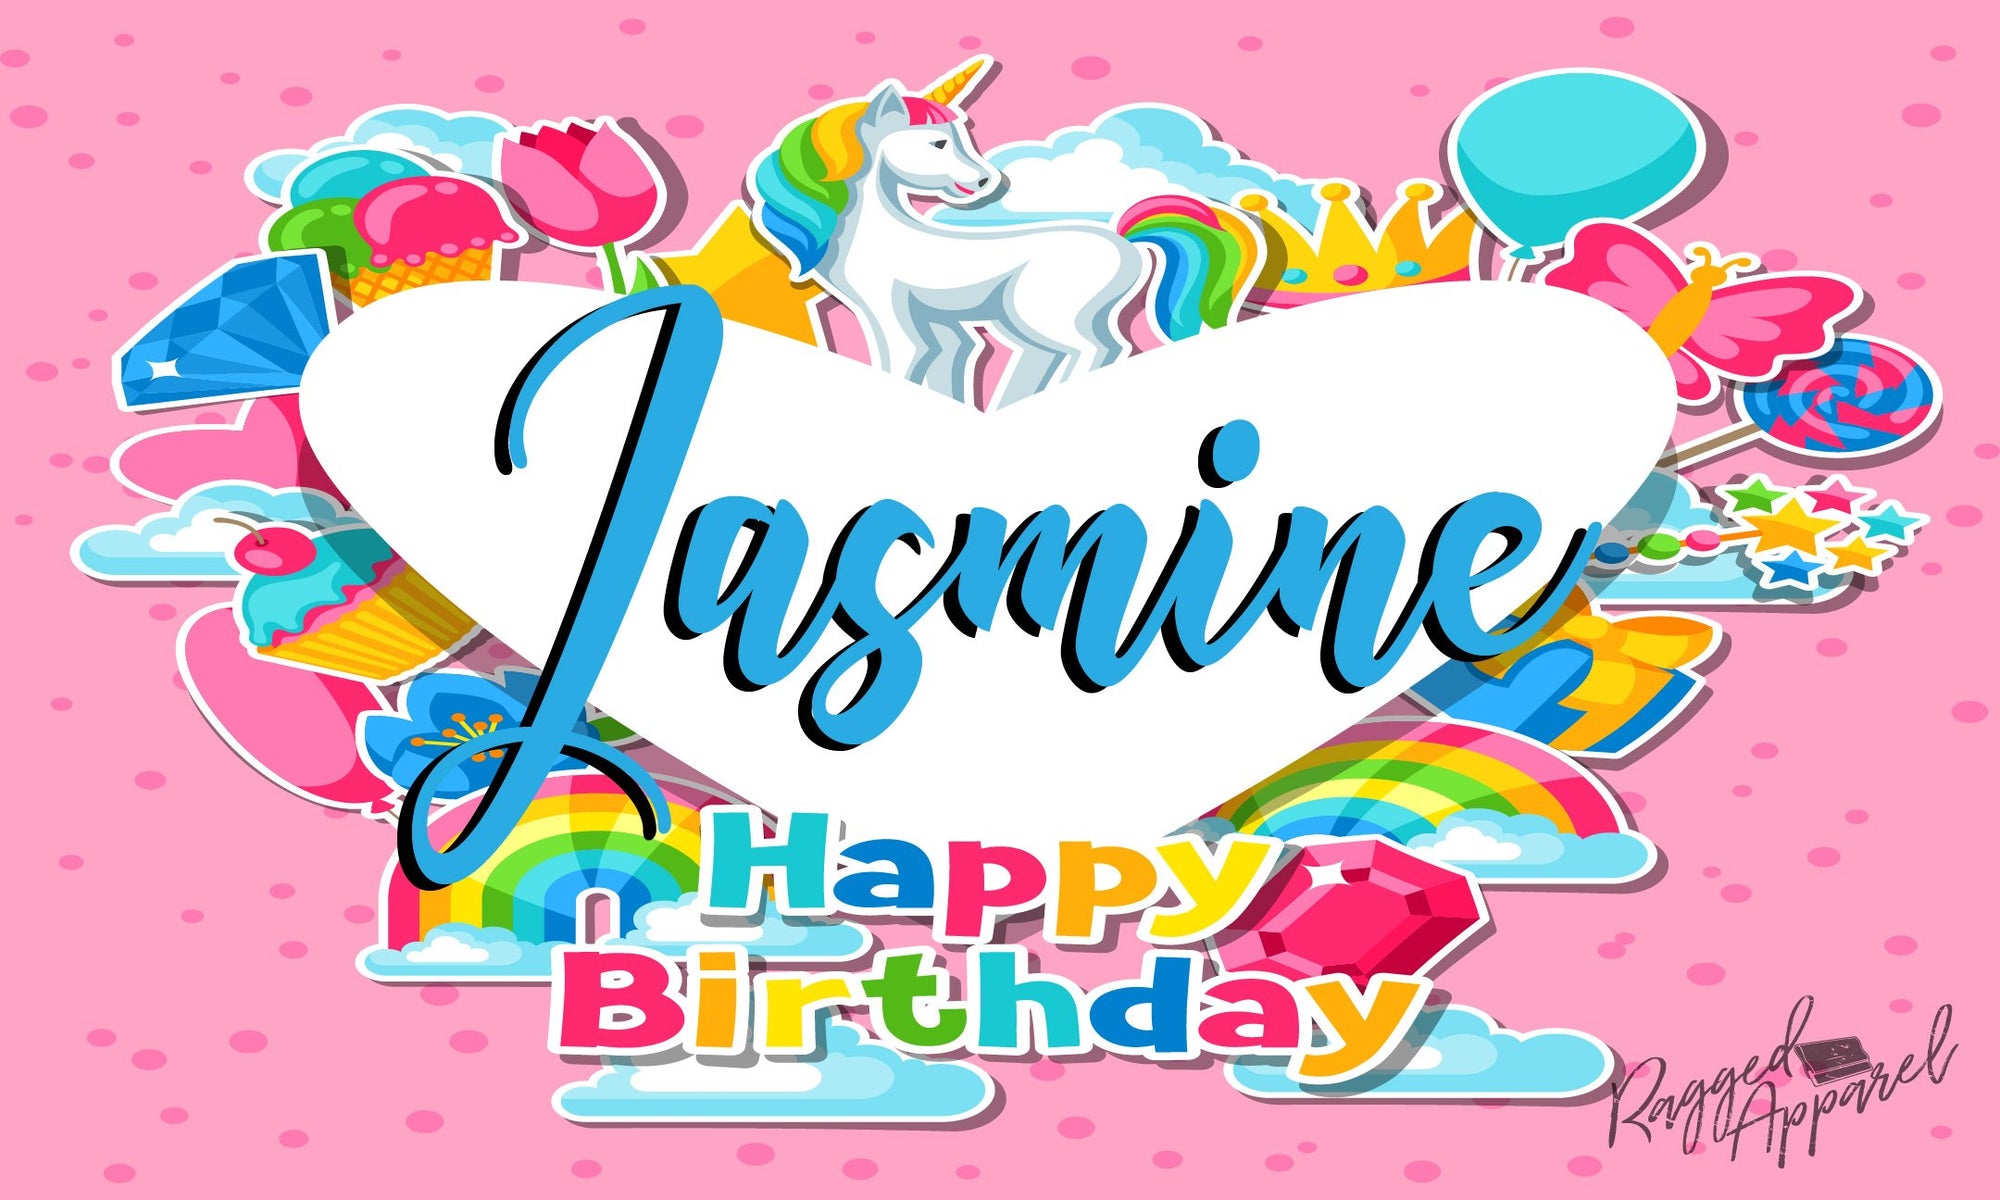 Personalized Unicorn Birthday Banner - Ragged Apparel Screen Printing and Signs - www.nmshirts.com